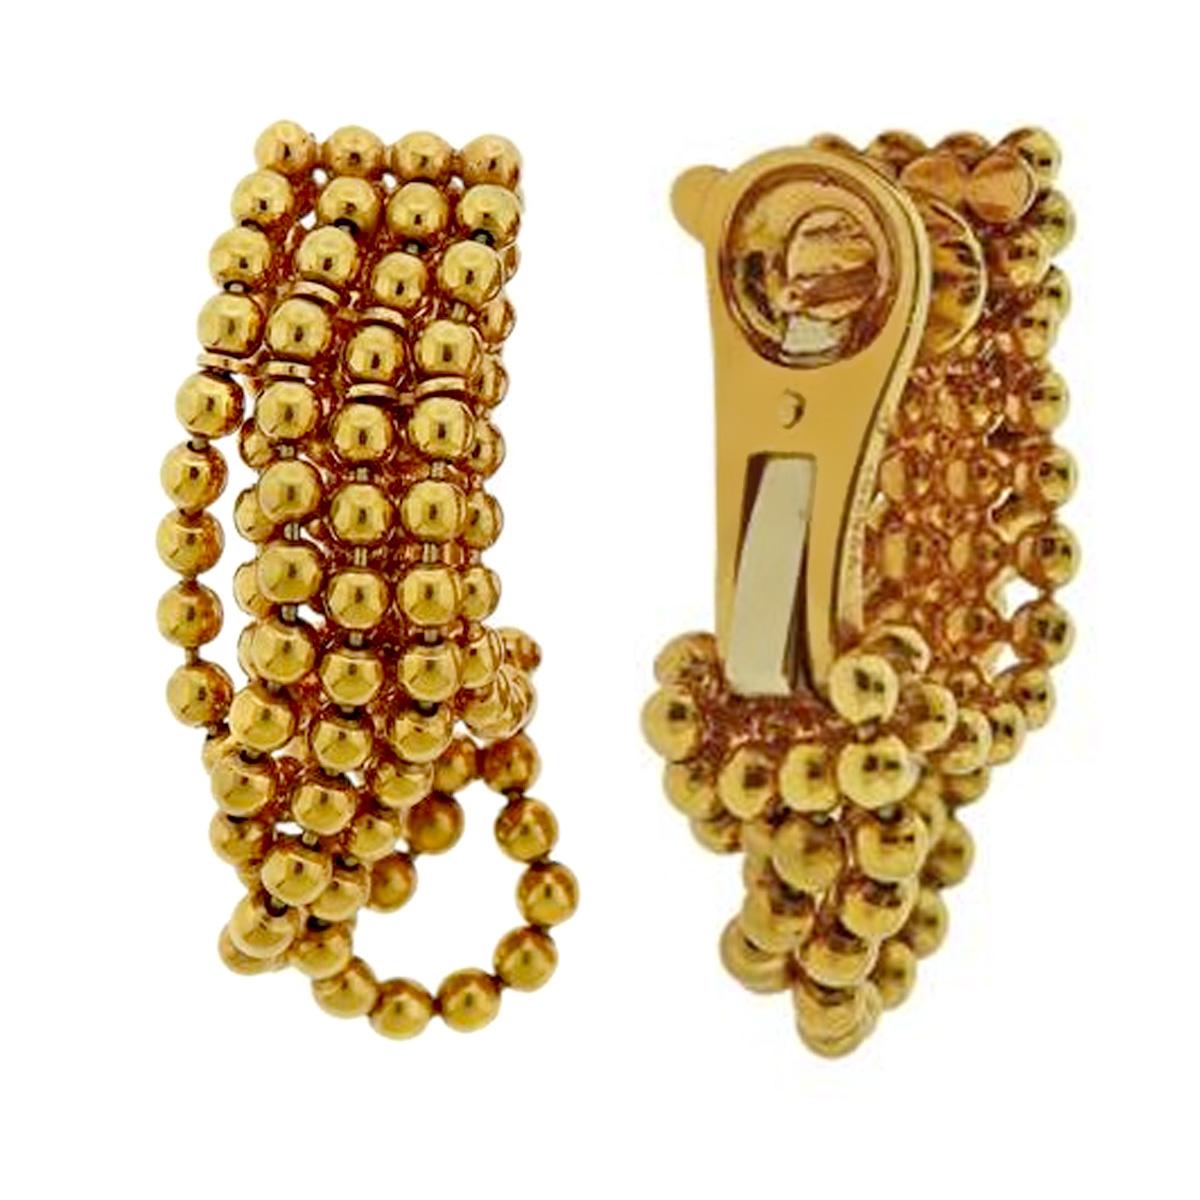 A magnificent set of authentic Cartier earrings featuring a beaded design in shimmering 18k yellow gold. The earrings are circa 1990s and measure 1.37